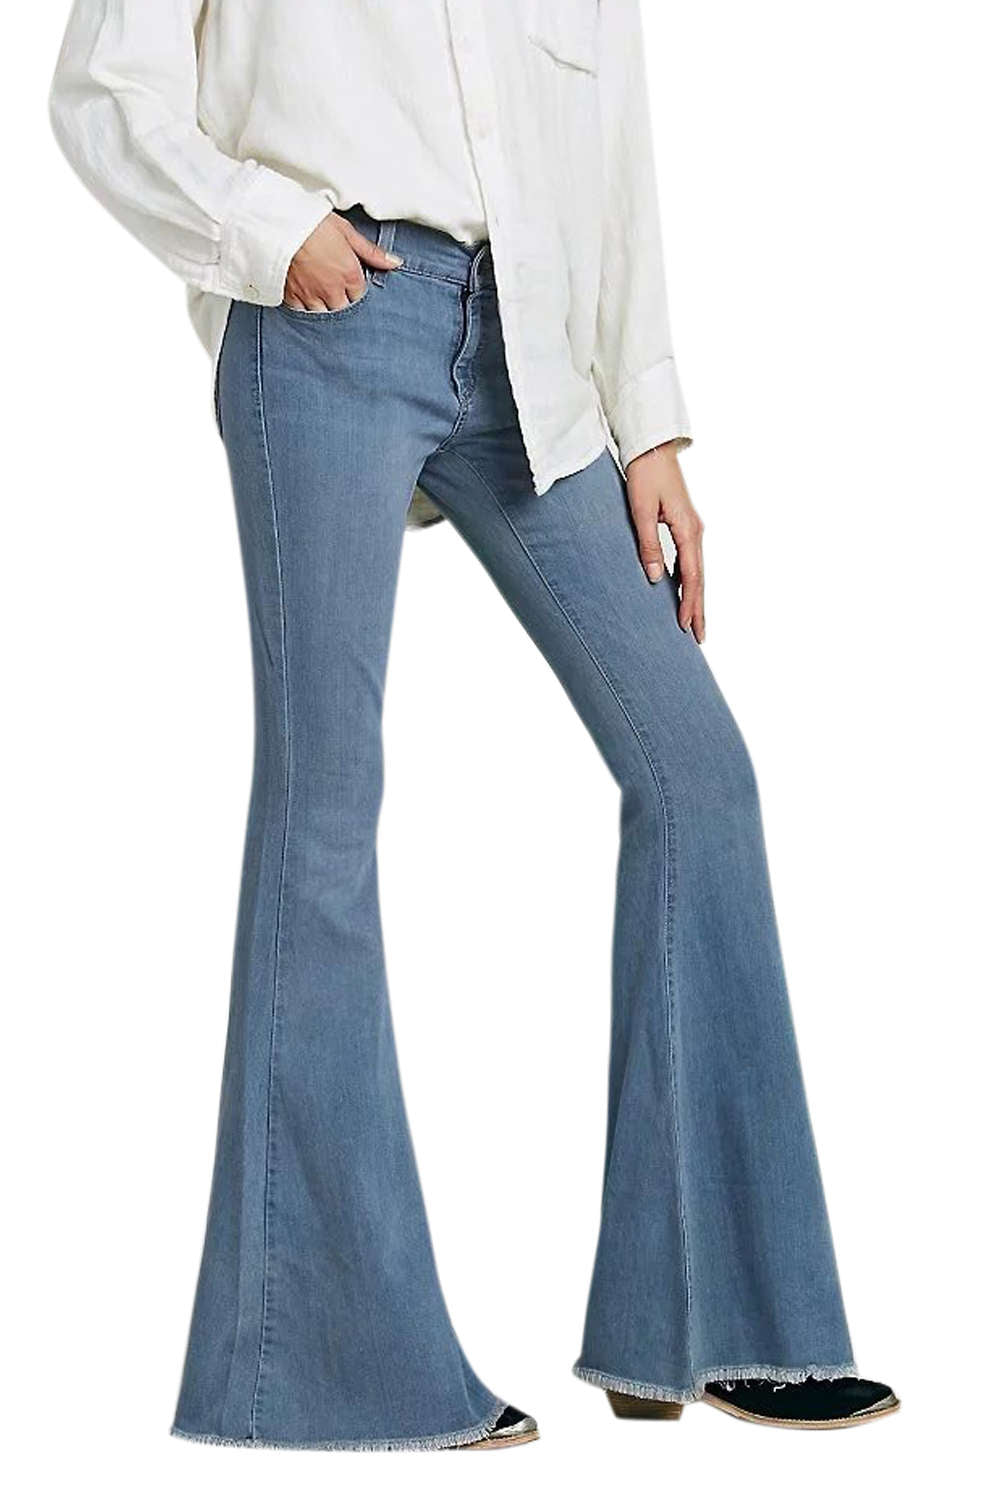 Iyasson Women's Vintage Flare Jeans